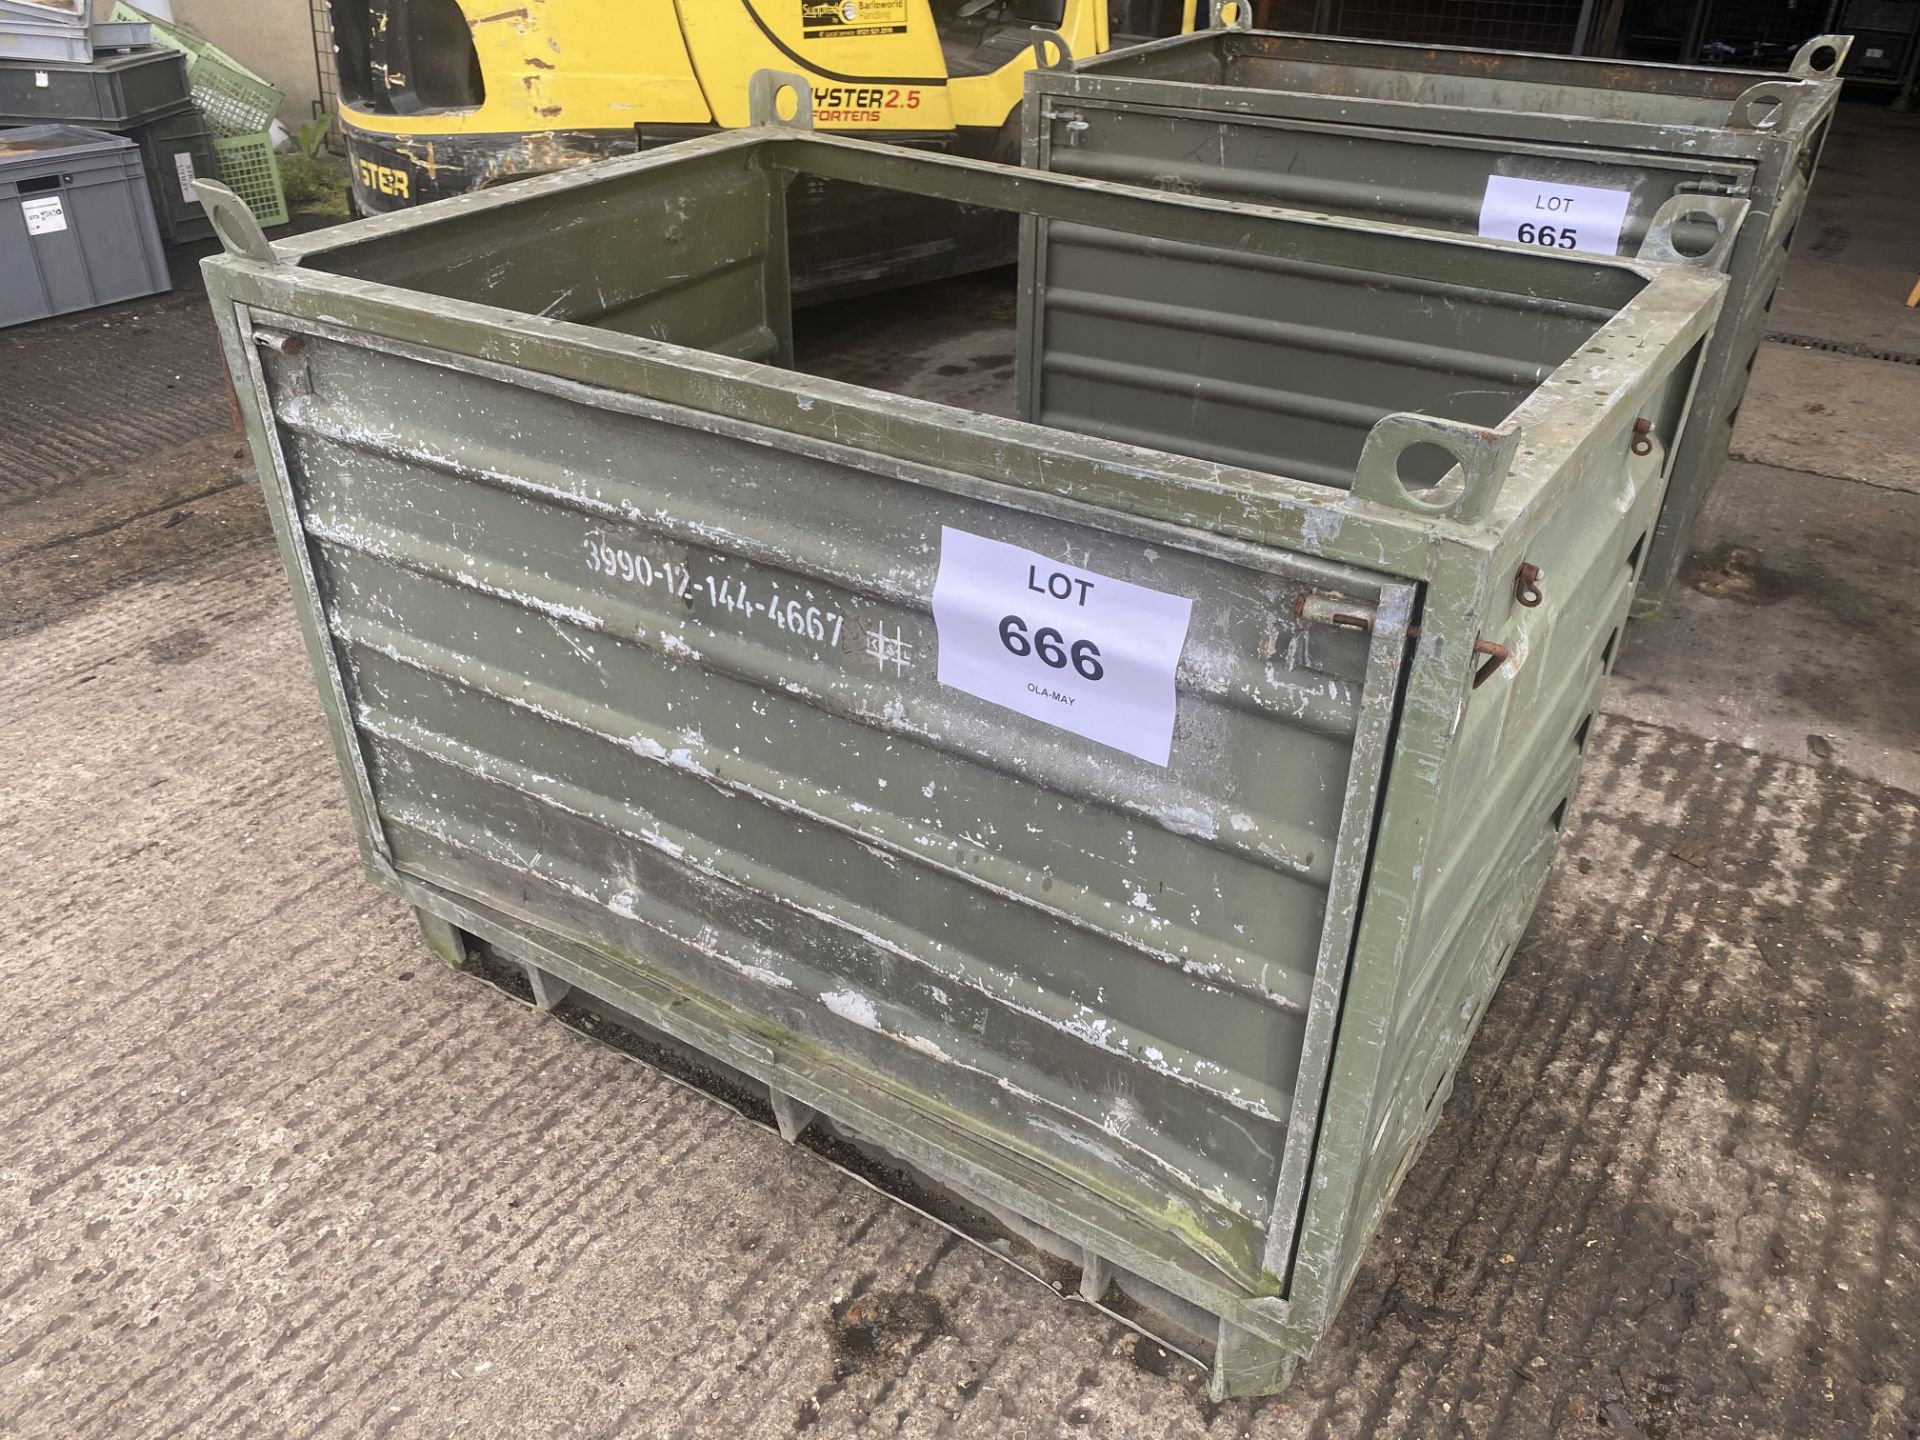 1 x Metal Storage / Transport Crate with Fold down side, Size 130 x 90 x 90 cm - Image 7 of 7